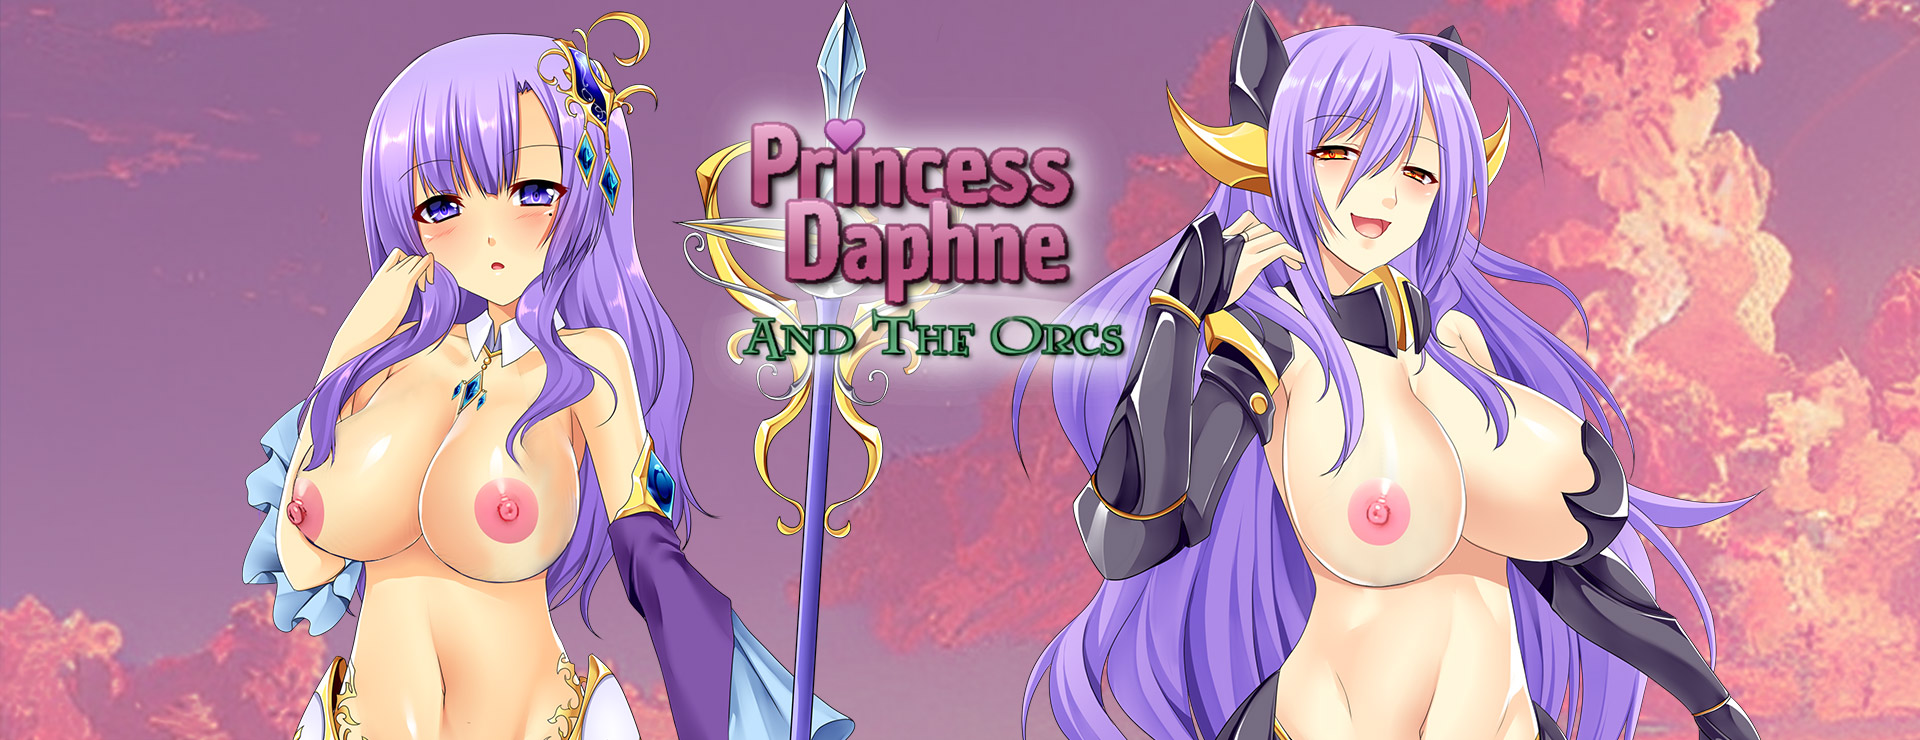 Princess Daphne and the Orcs - RPG Spiel